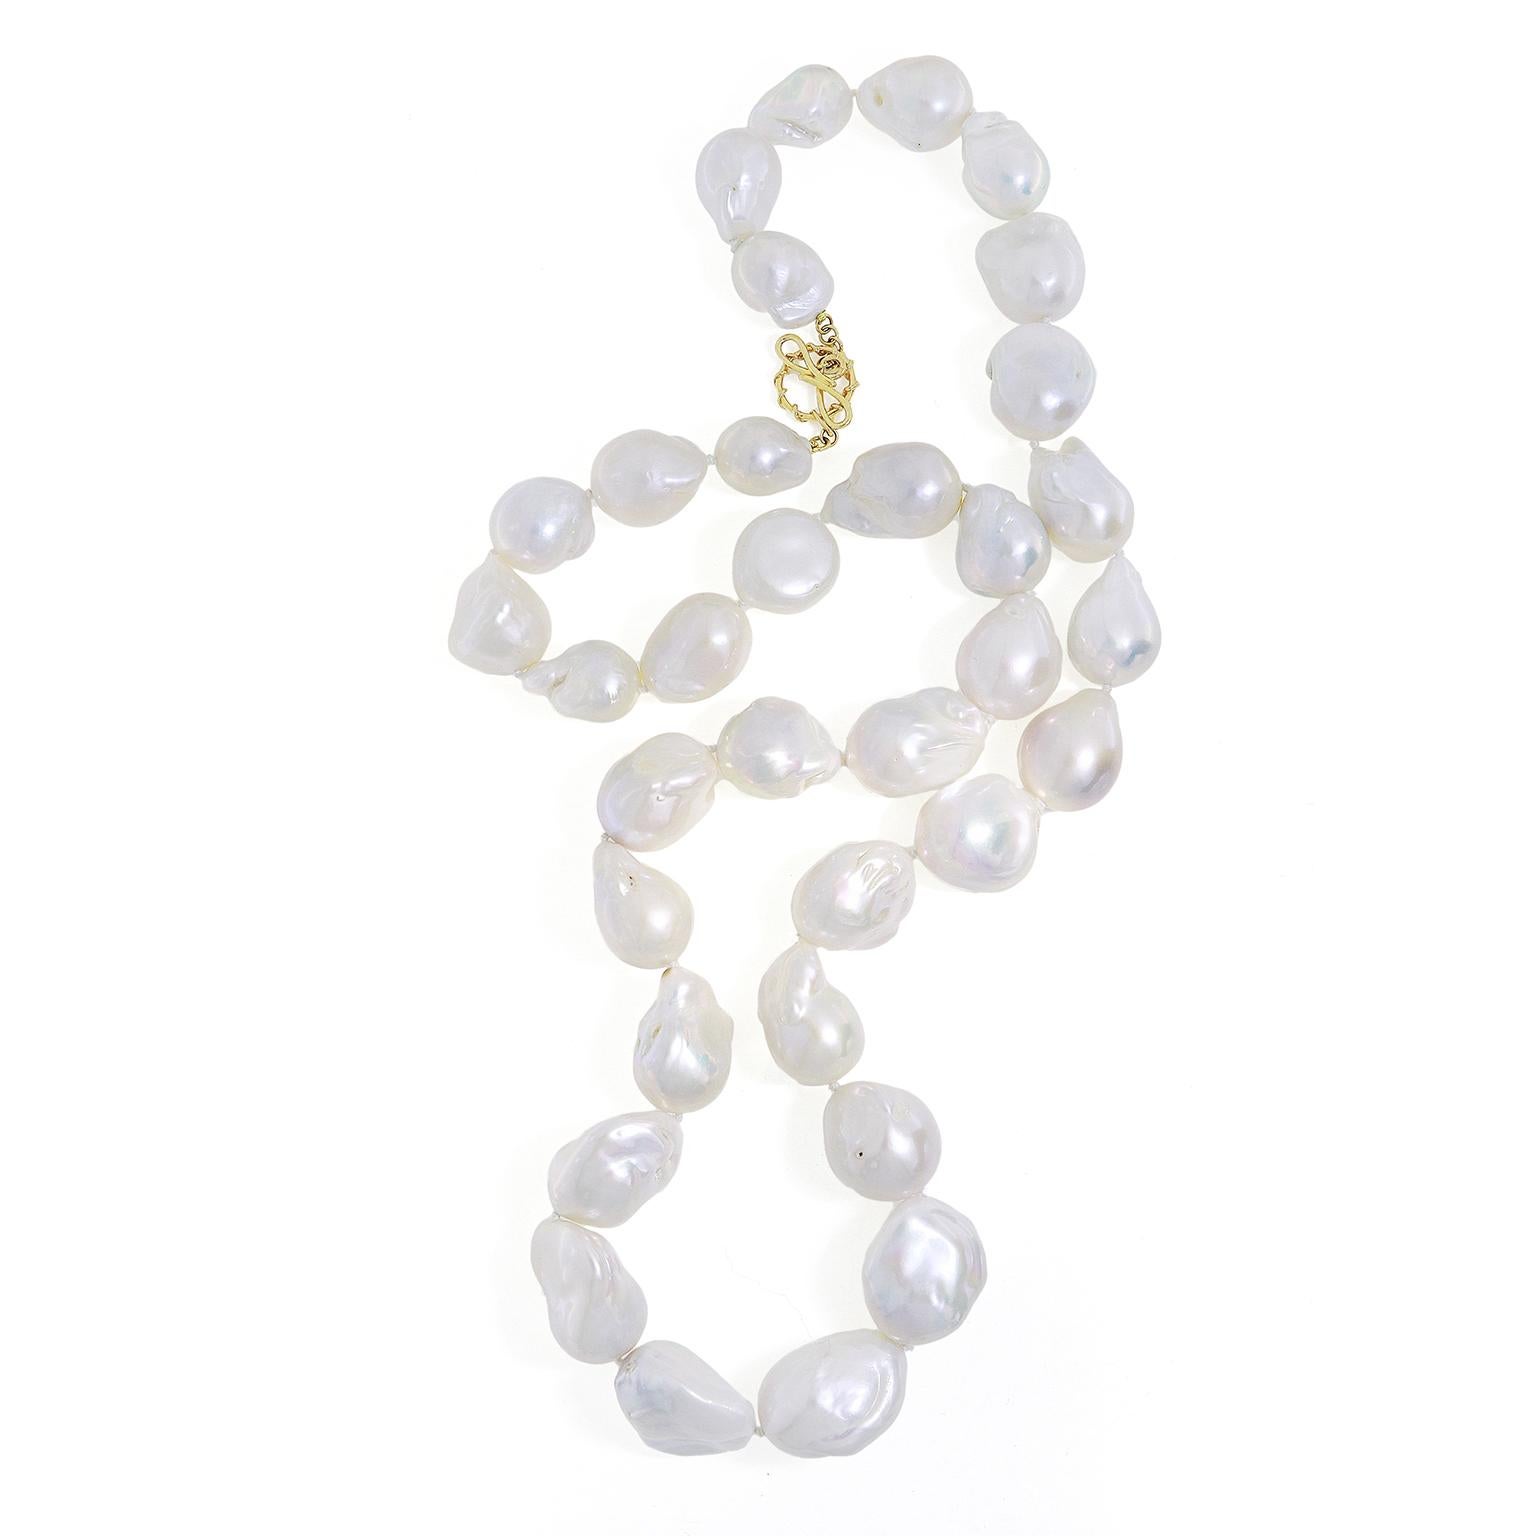 The multicolored hued beauty of baroque freshwater pearls gleams in this necklace. White, pink and blue tones are lifted when the light falls onto the irregular shaped gems. This totals to 1860 carats. Completed by an 18k yellow gold knot and toggle